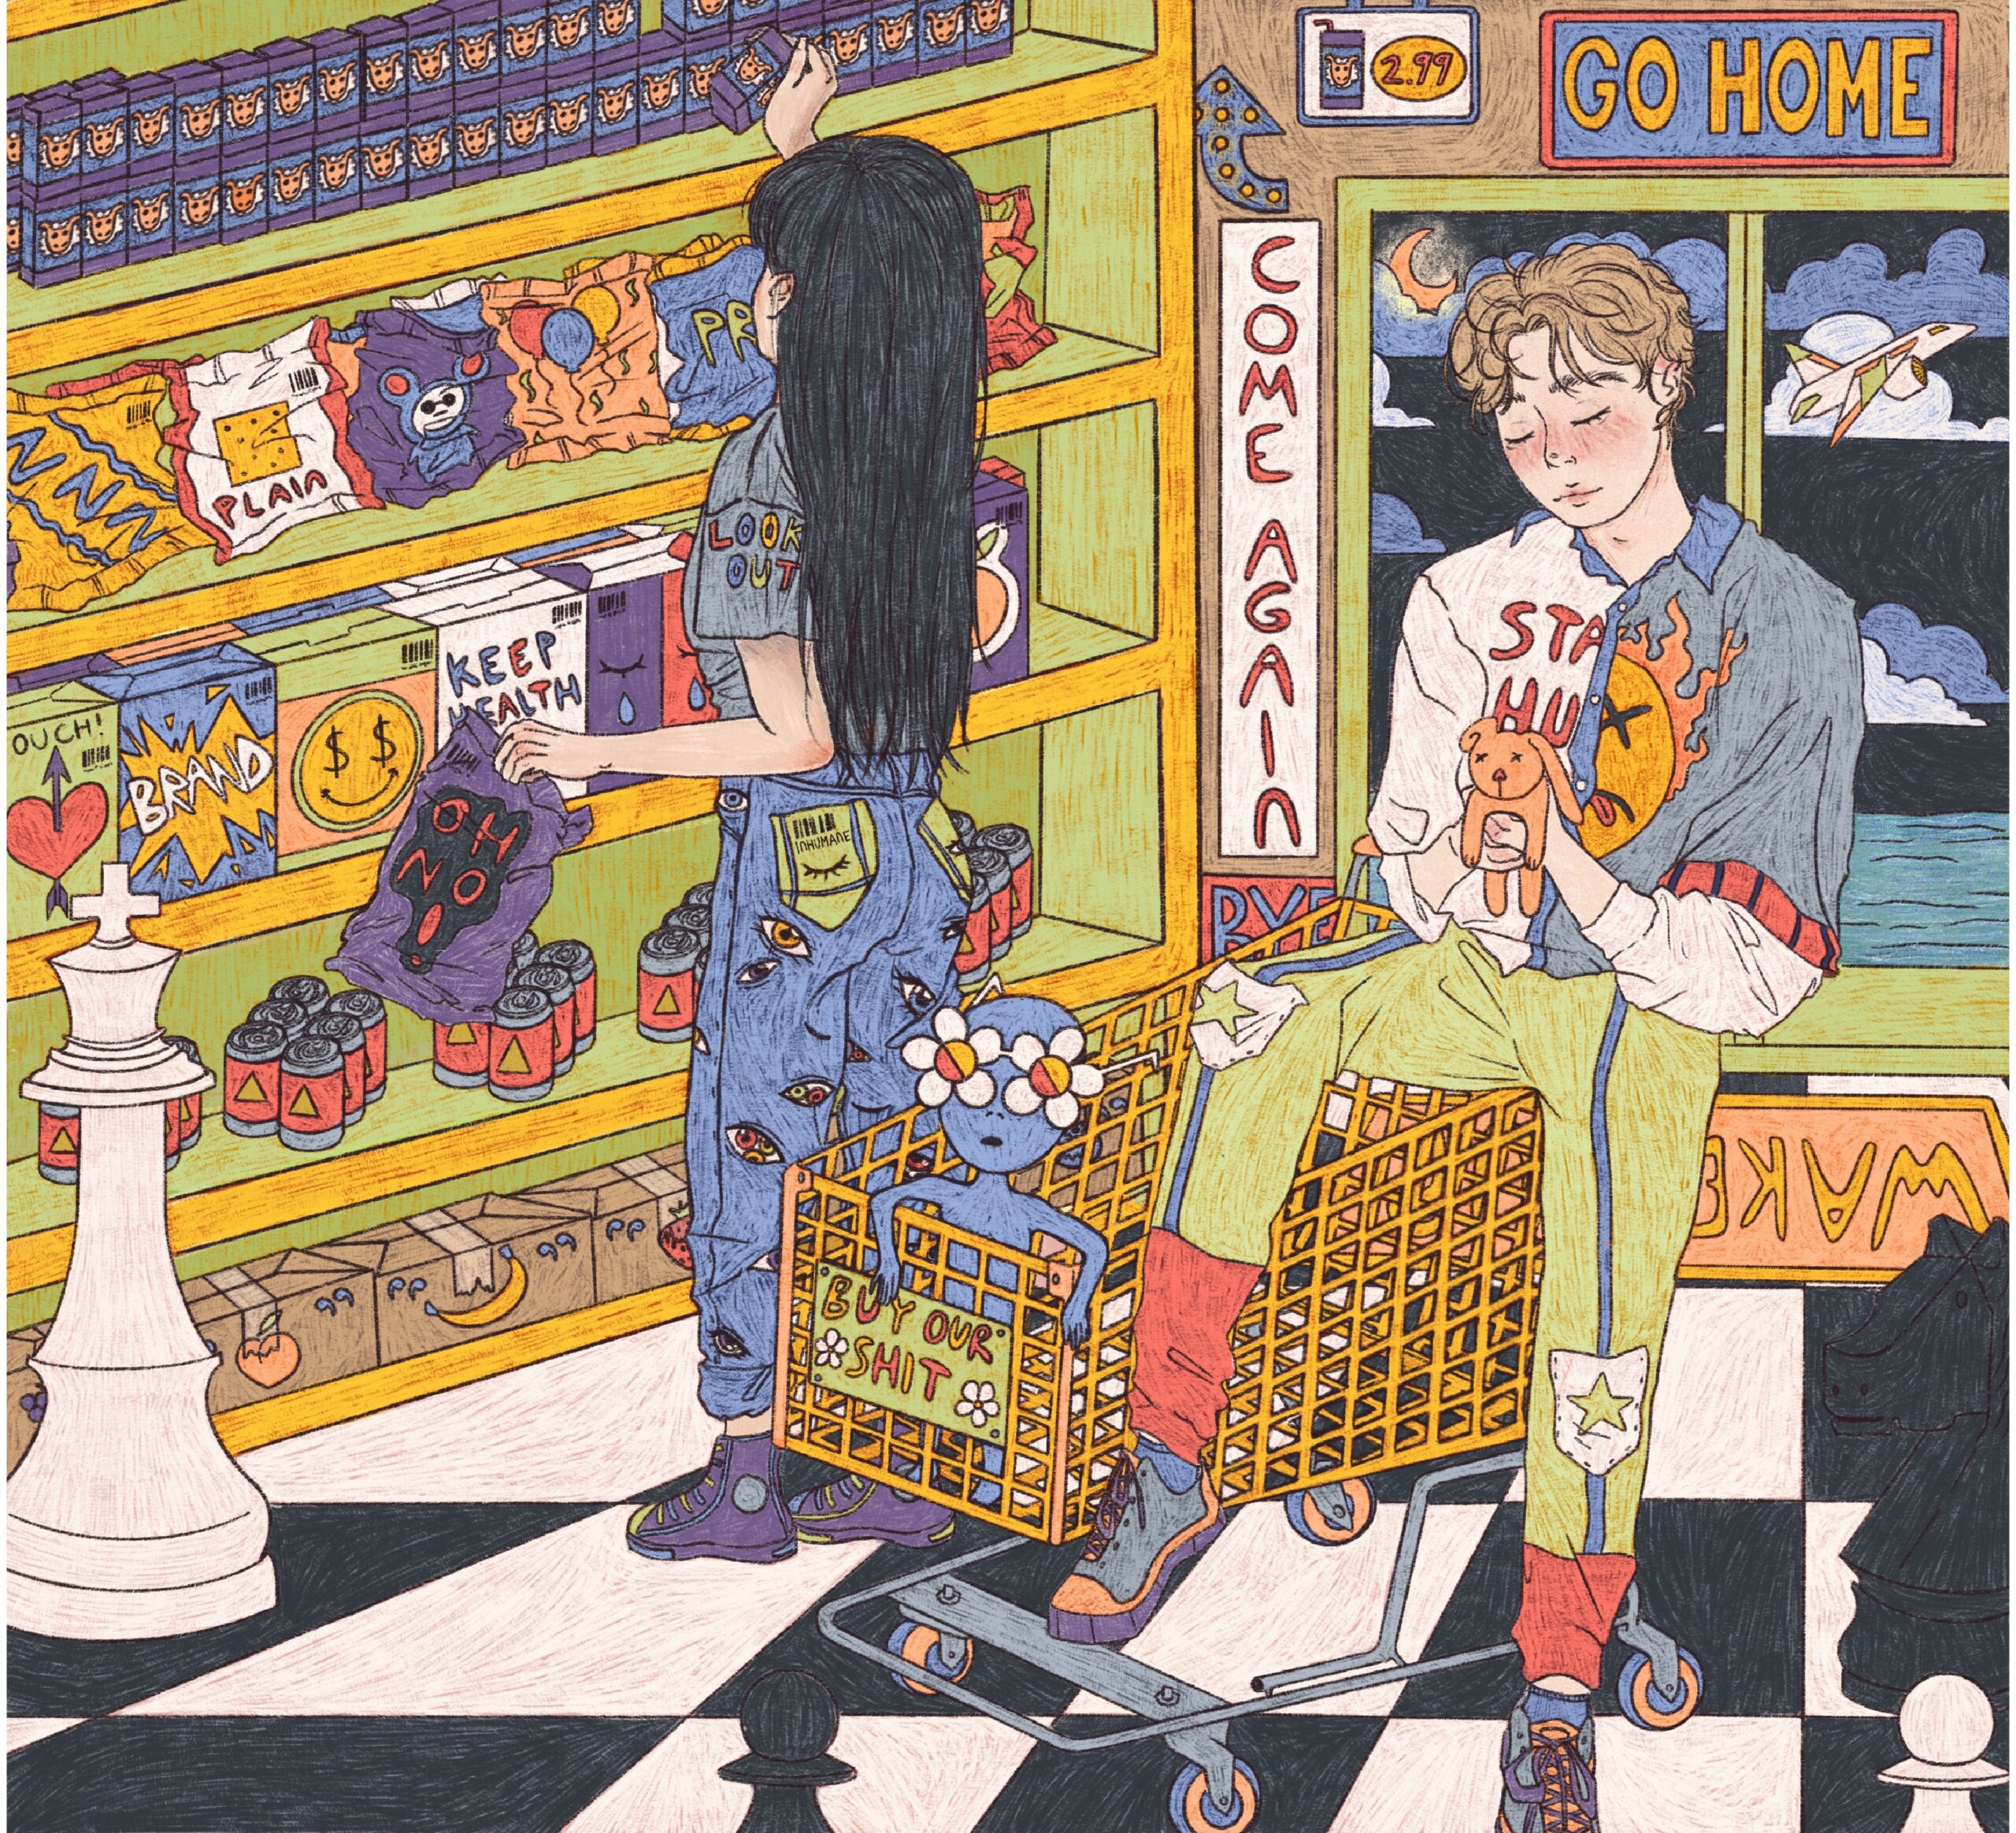 A girl with long black hair reaches to the top shelf of a market to get a small purple box of bunny food. Her baggy pants are patterned with eye symbols. A young boy in colourful hip-hop clothing hangs one leg over a yellow shopping cart which holds a small naked blue being with daisy eyes. The boy is looking down at a small floppy bunny in his hands. The floor is black and white checks, and in the foreground are large chess-pieces. Outside a window we glimpse a calm sea, crescent moon, and an airplane ascending through clouds.